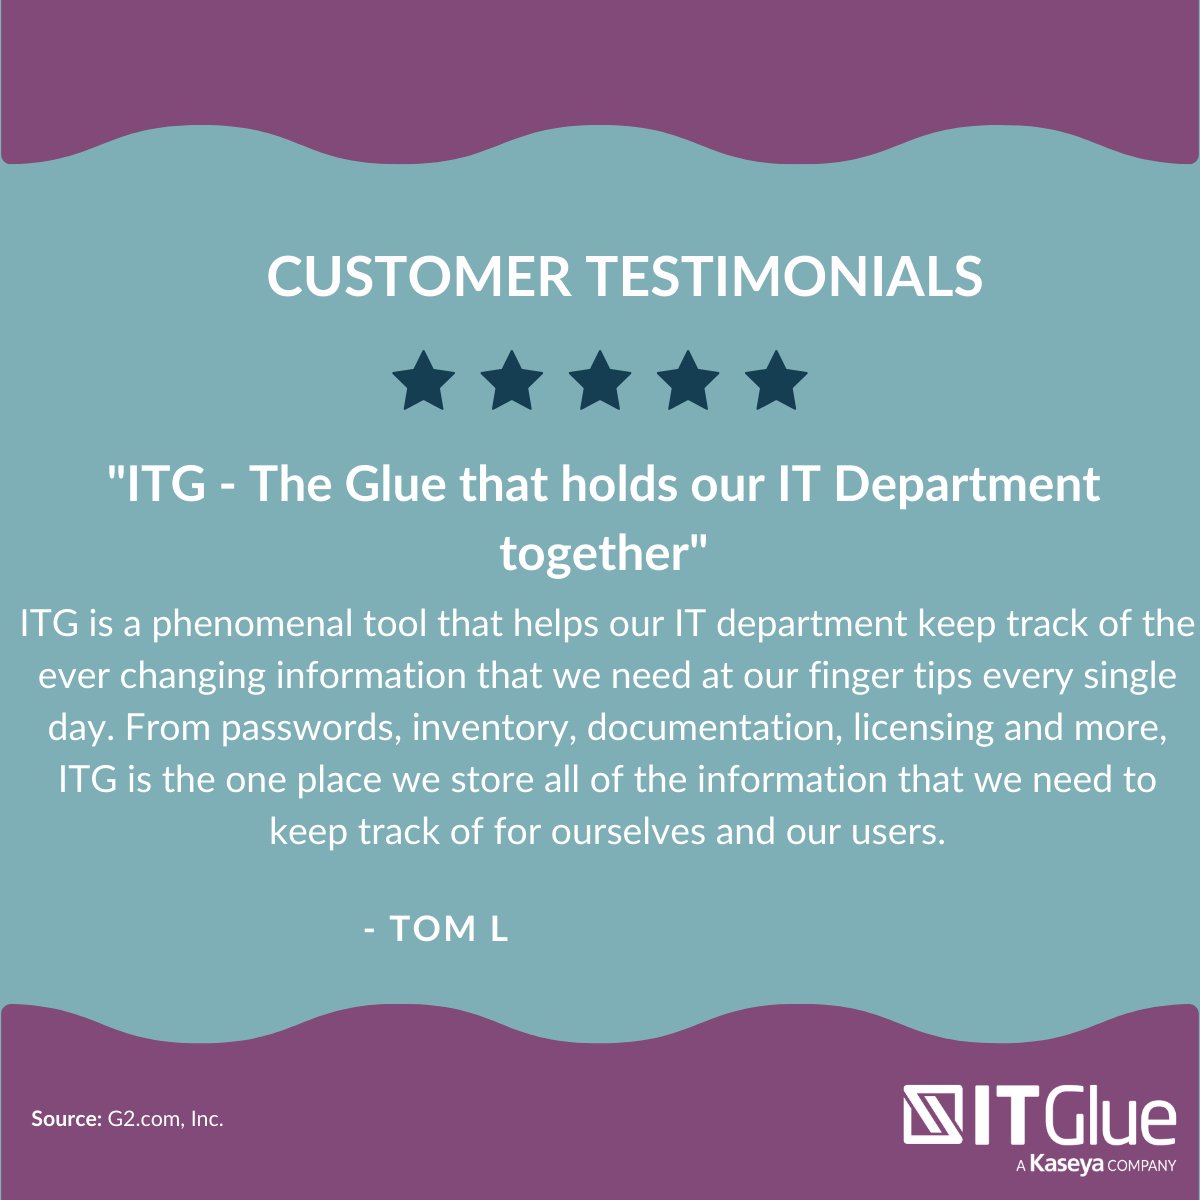 'ITG - The Glue that holds our IT Department together' -Tom L @g2 reviewer Discover the power of IT Glue: bit.ly/49SvOy7 #CustomerTestimonial